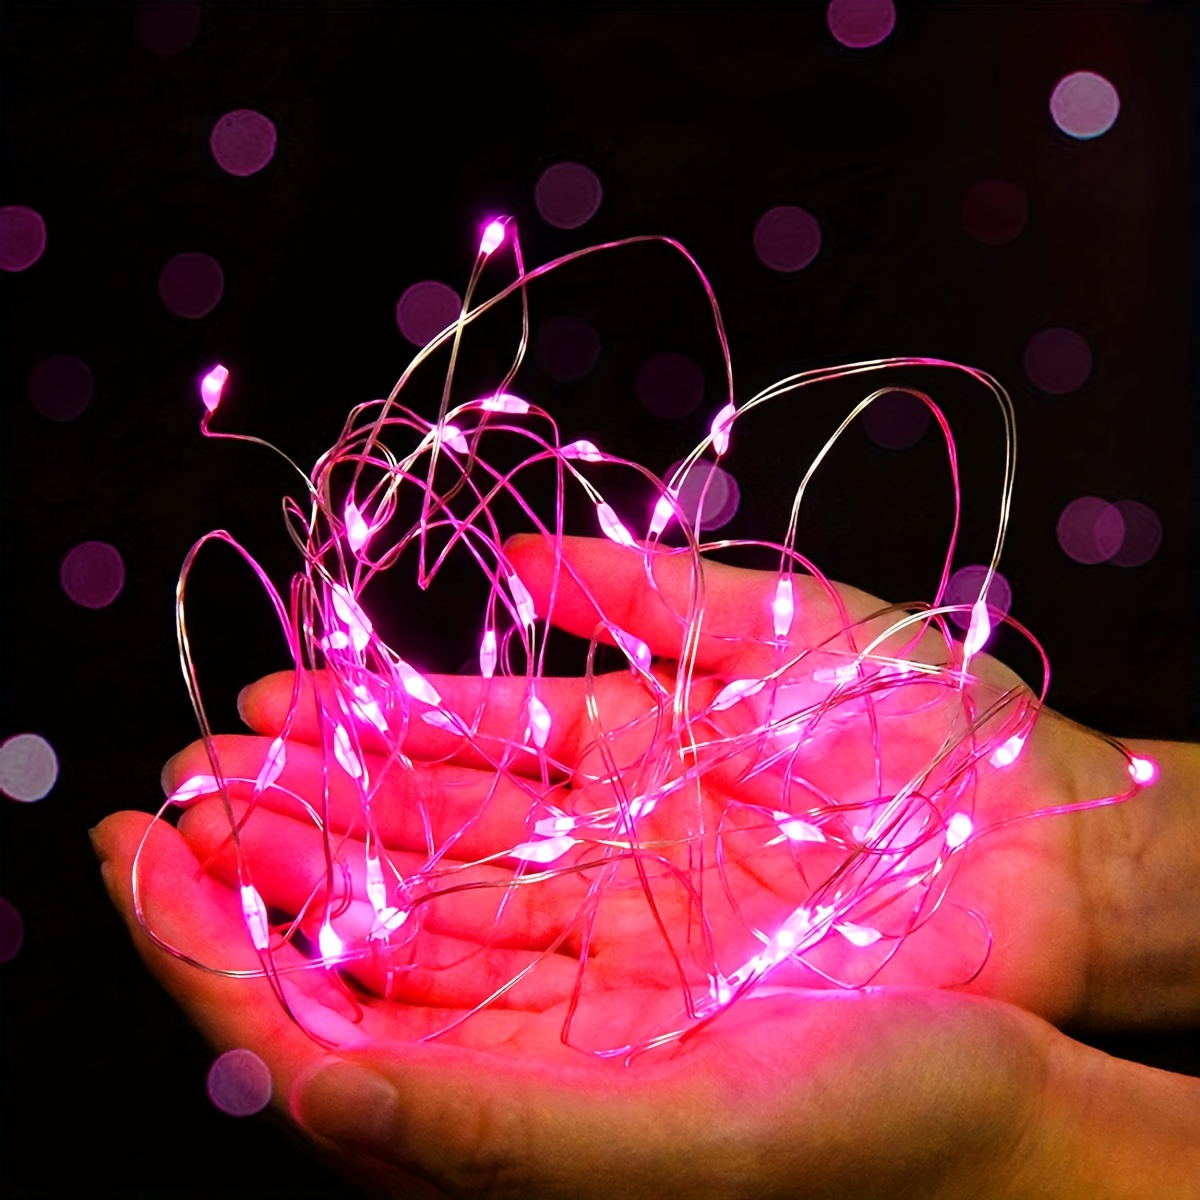 battery operated string lights, led fairy lights battery operated string lights copper wire string lights mini battery powered led lights for bedroom christmas parties wedding centerpiece decoration details 19